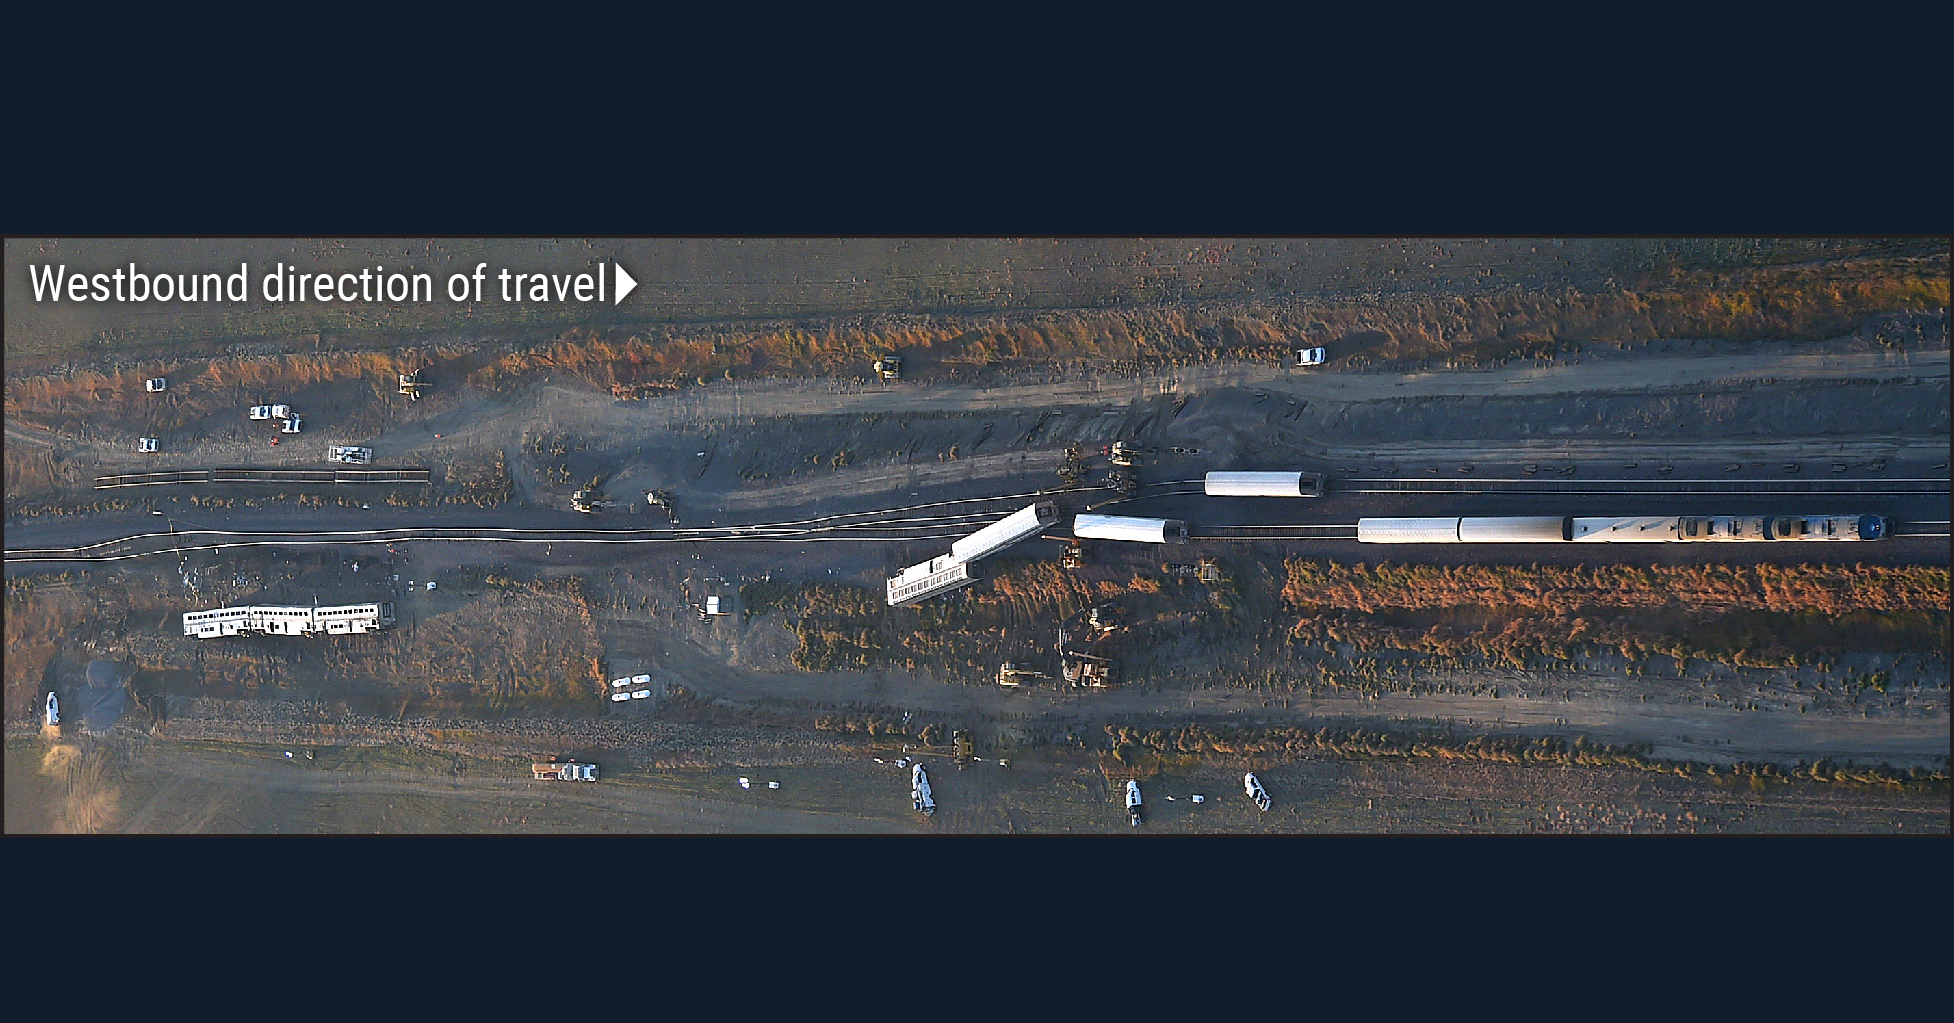 Aerial view of the accident scene, derailed train and debris